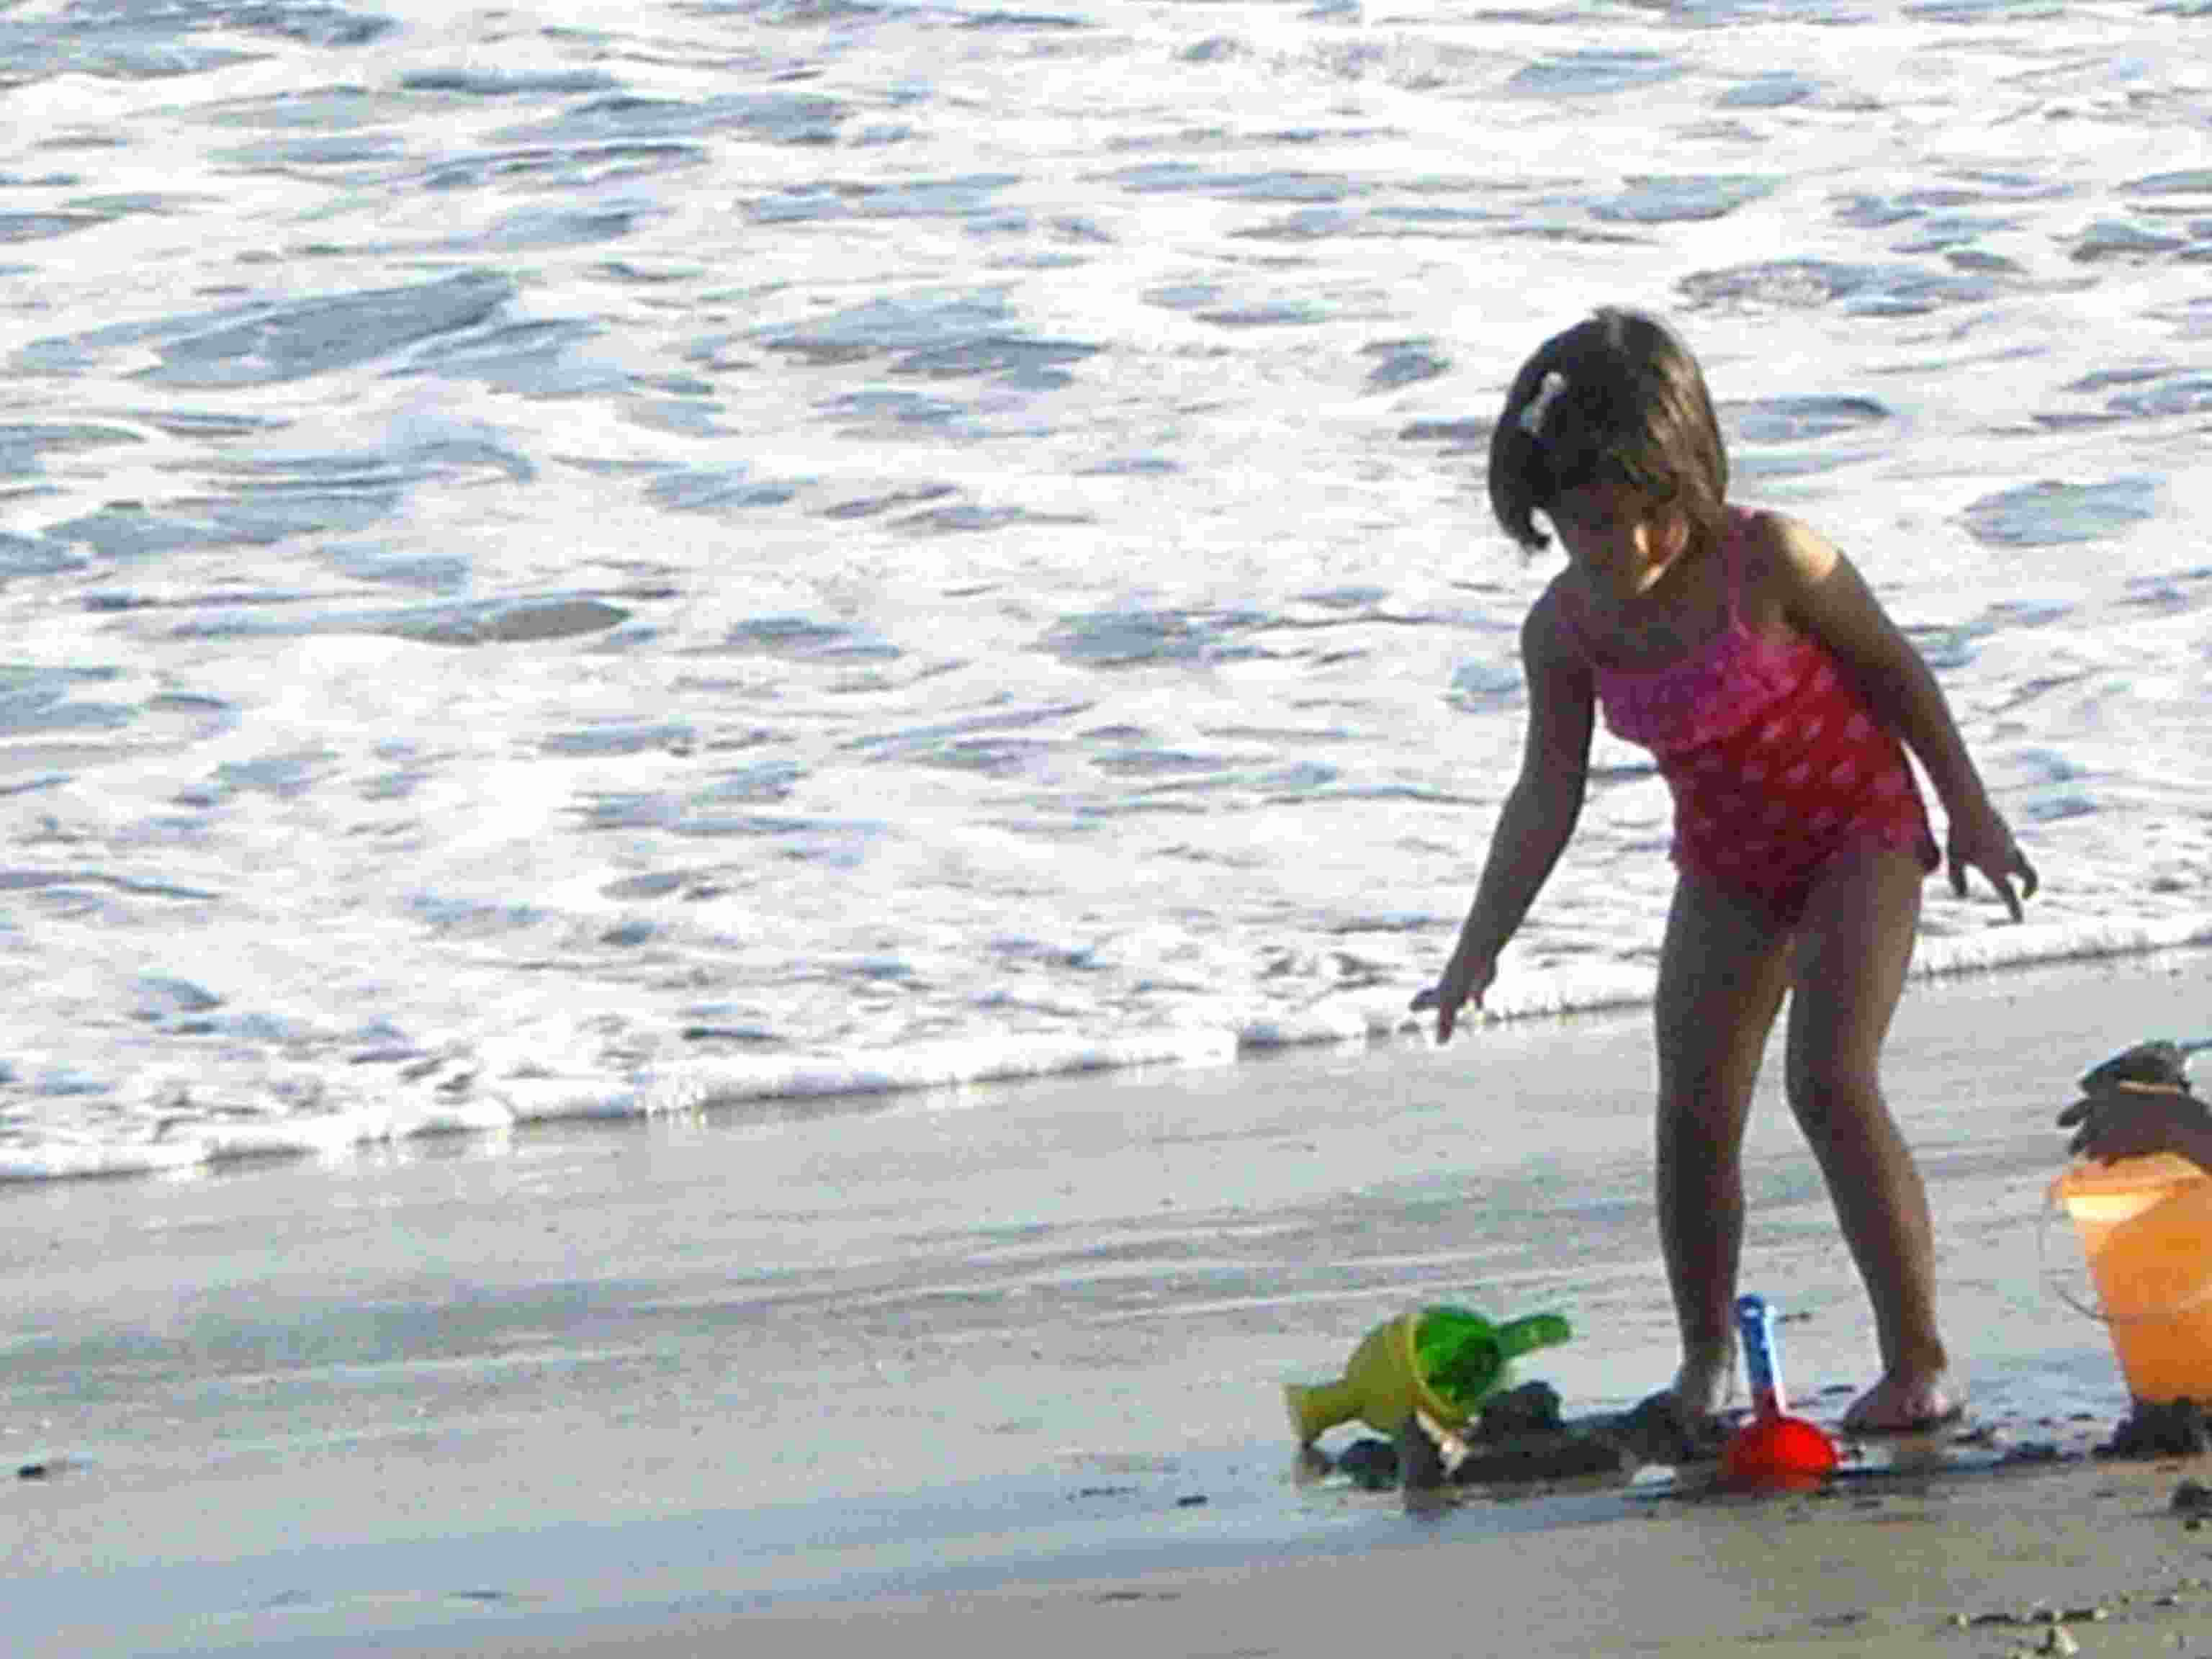 Hope’s first time in the surf, Santa Barbara, Aug 2012